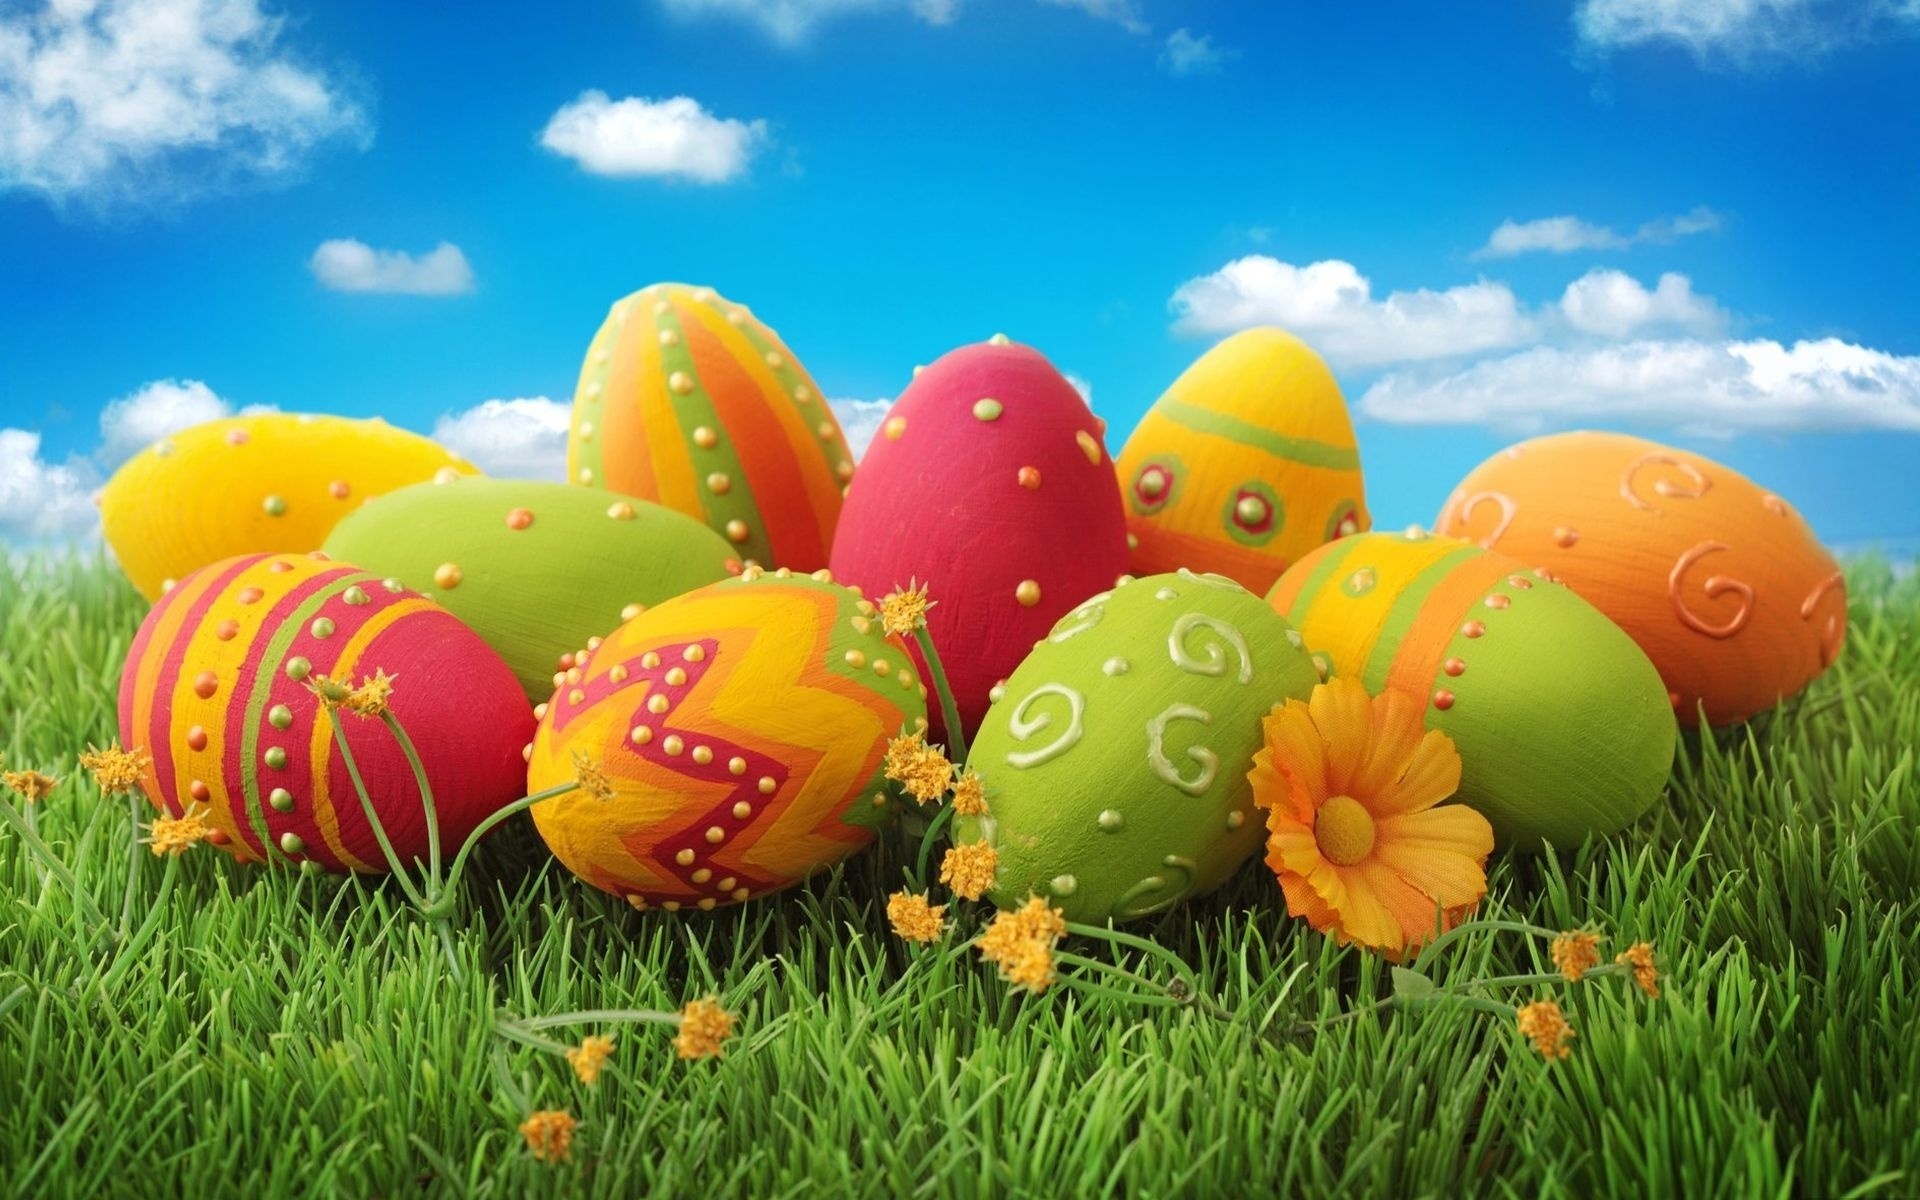 Easter Holiday HD Wallpaper Search More Holidays Festivals High